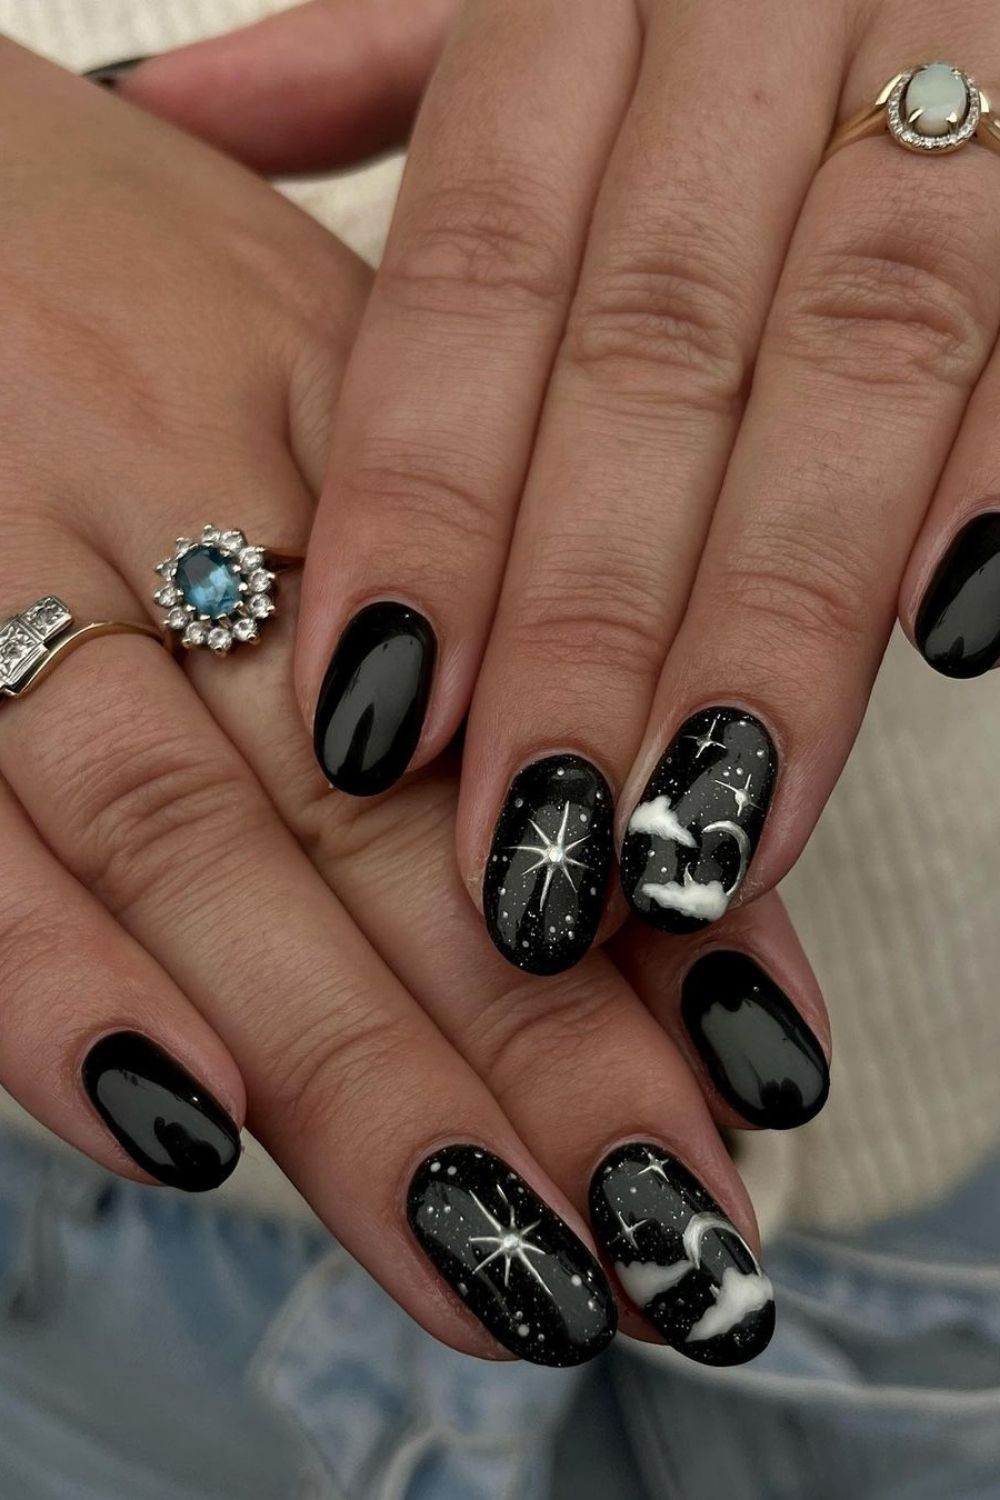 Black celestial nails with clouds and stars on an Almon nail shape